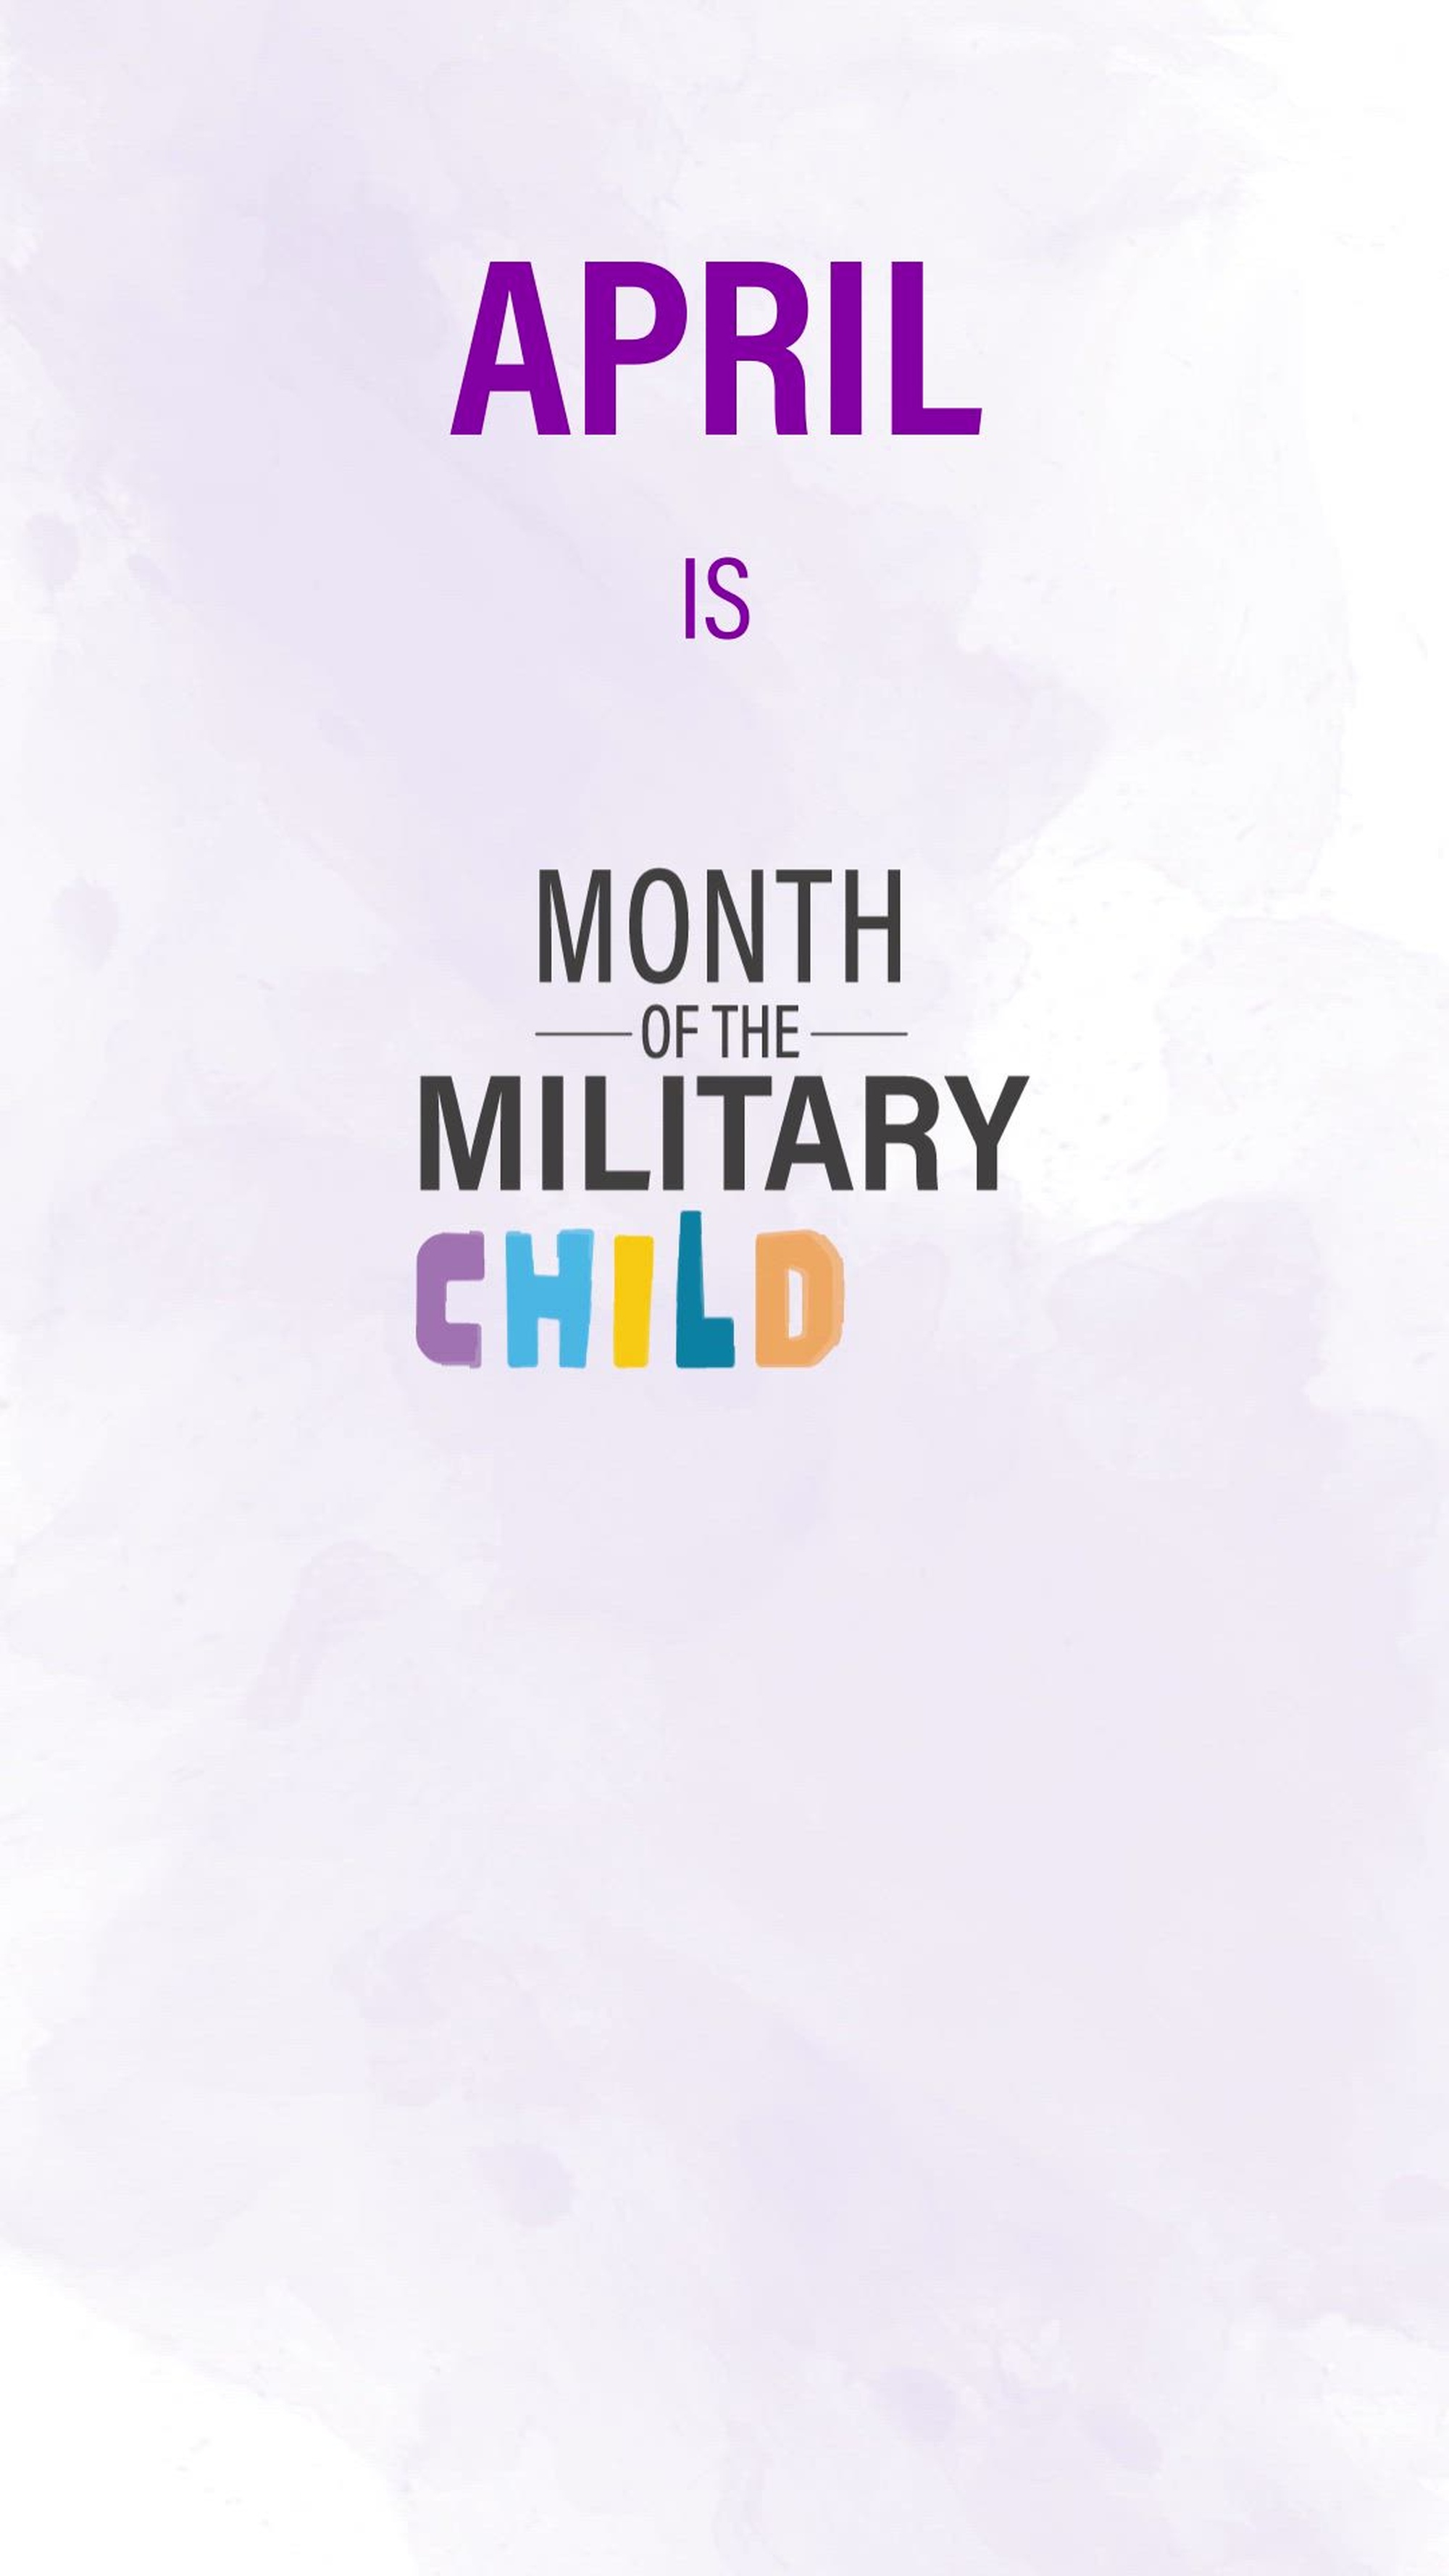 Month of the Military Child Animation created as an advertisement celebrating April as Month of the Military Child for the Air Force Reserve, at Robins Air Force Base, Georgia, April 13, 2023. This graphic was created as a TASK to commemorating the National Month of Observance. (U.S. Air Force Reserve still graphic by Mr. Ivan Rivera)